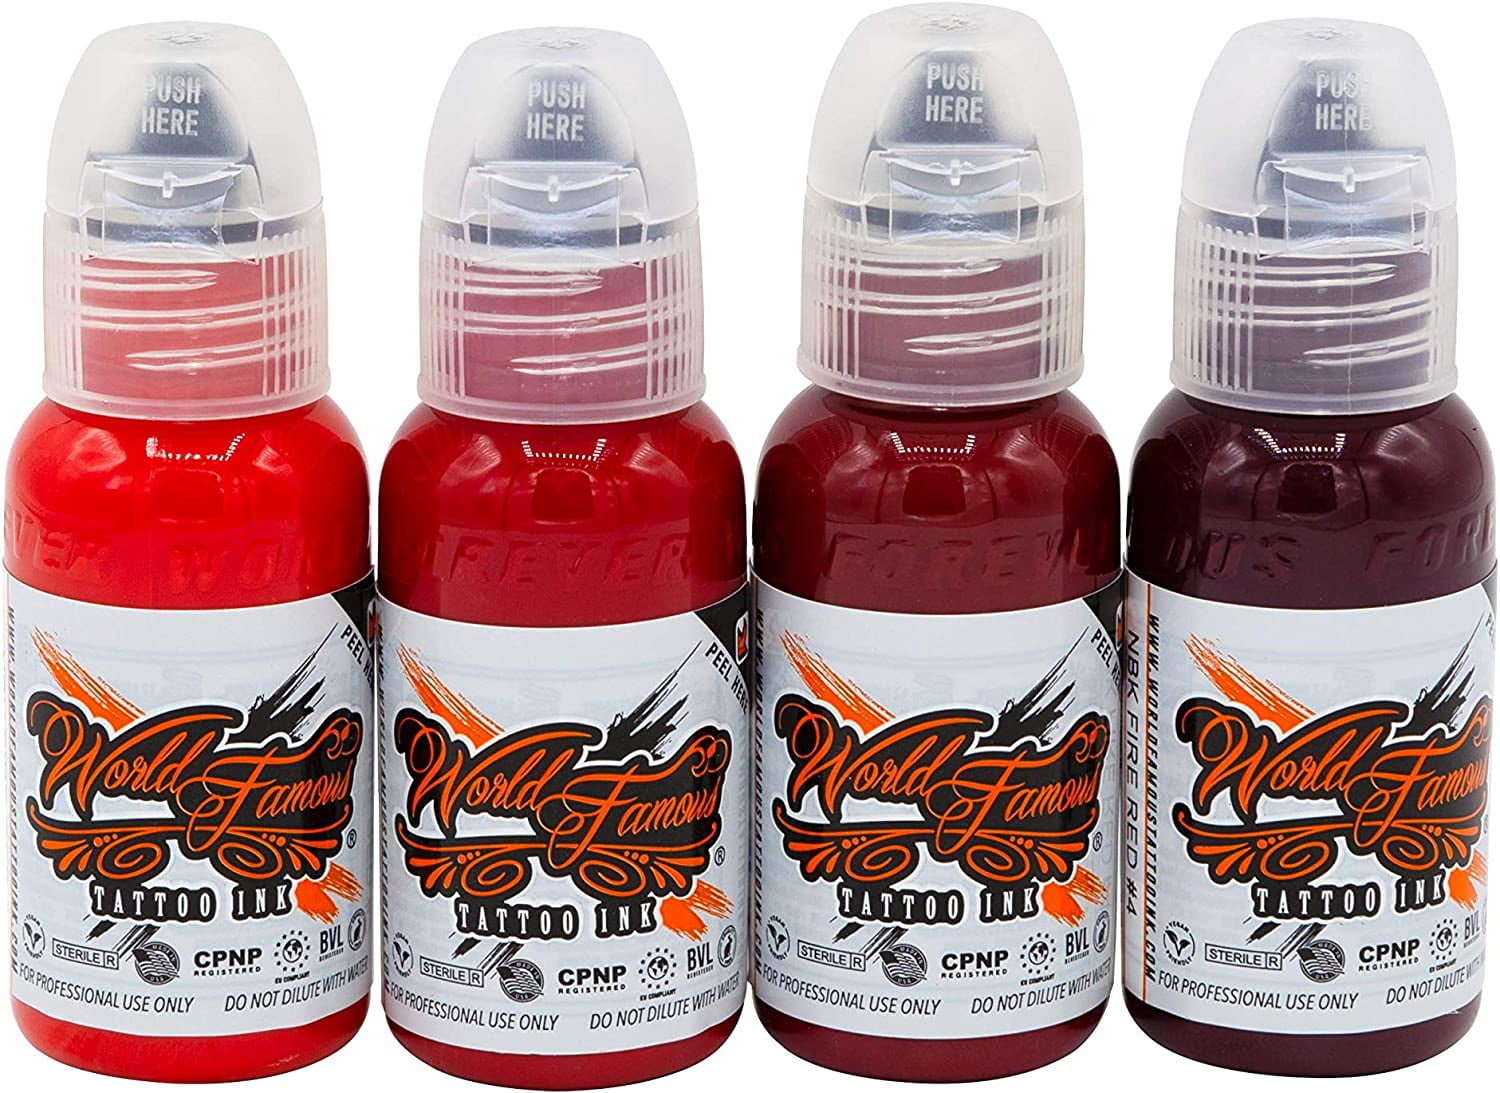 World Famous Red Tattoo Ink, Vegan and Professional Ink, Made in USA, Big  Apple Red, 2 oz